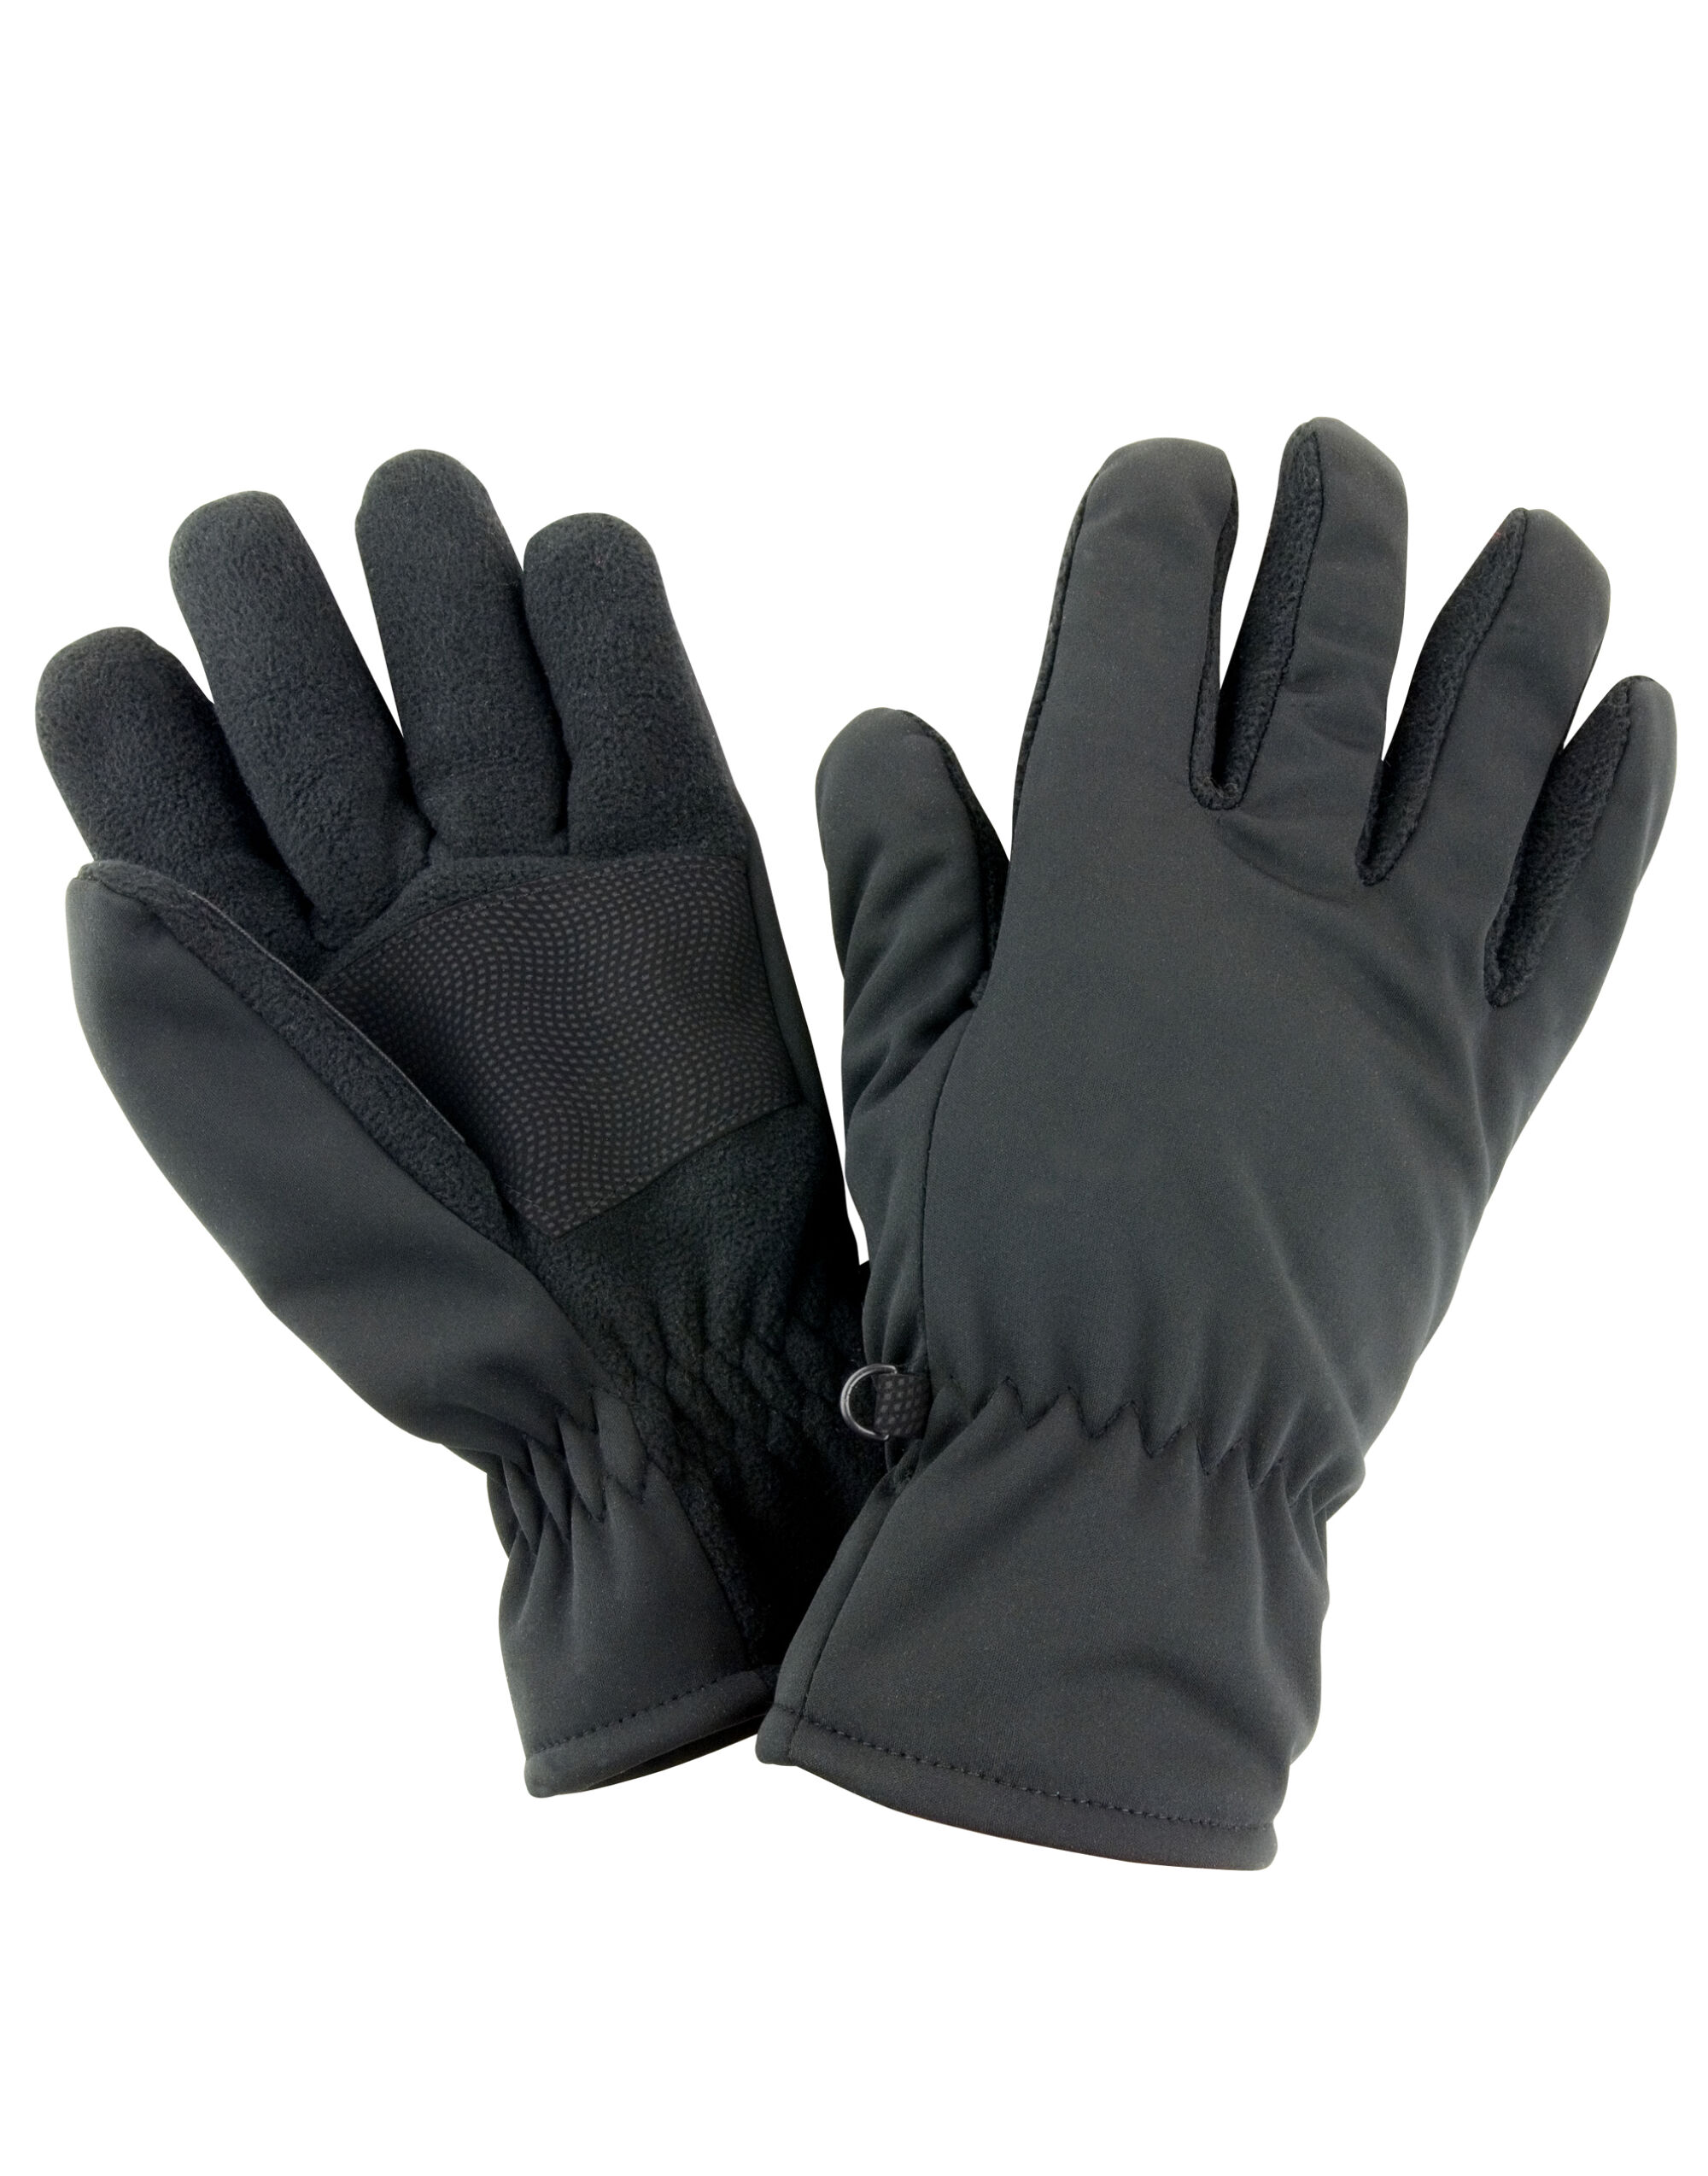 Result Winter Softshell Thermal Glove